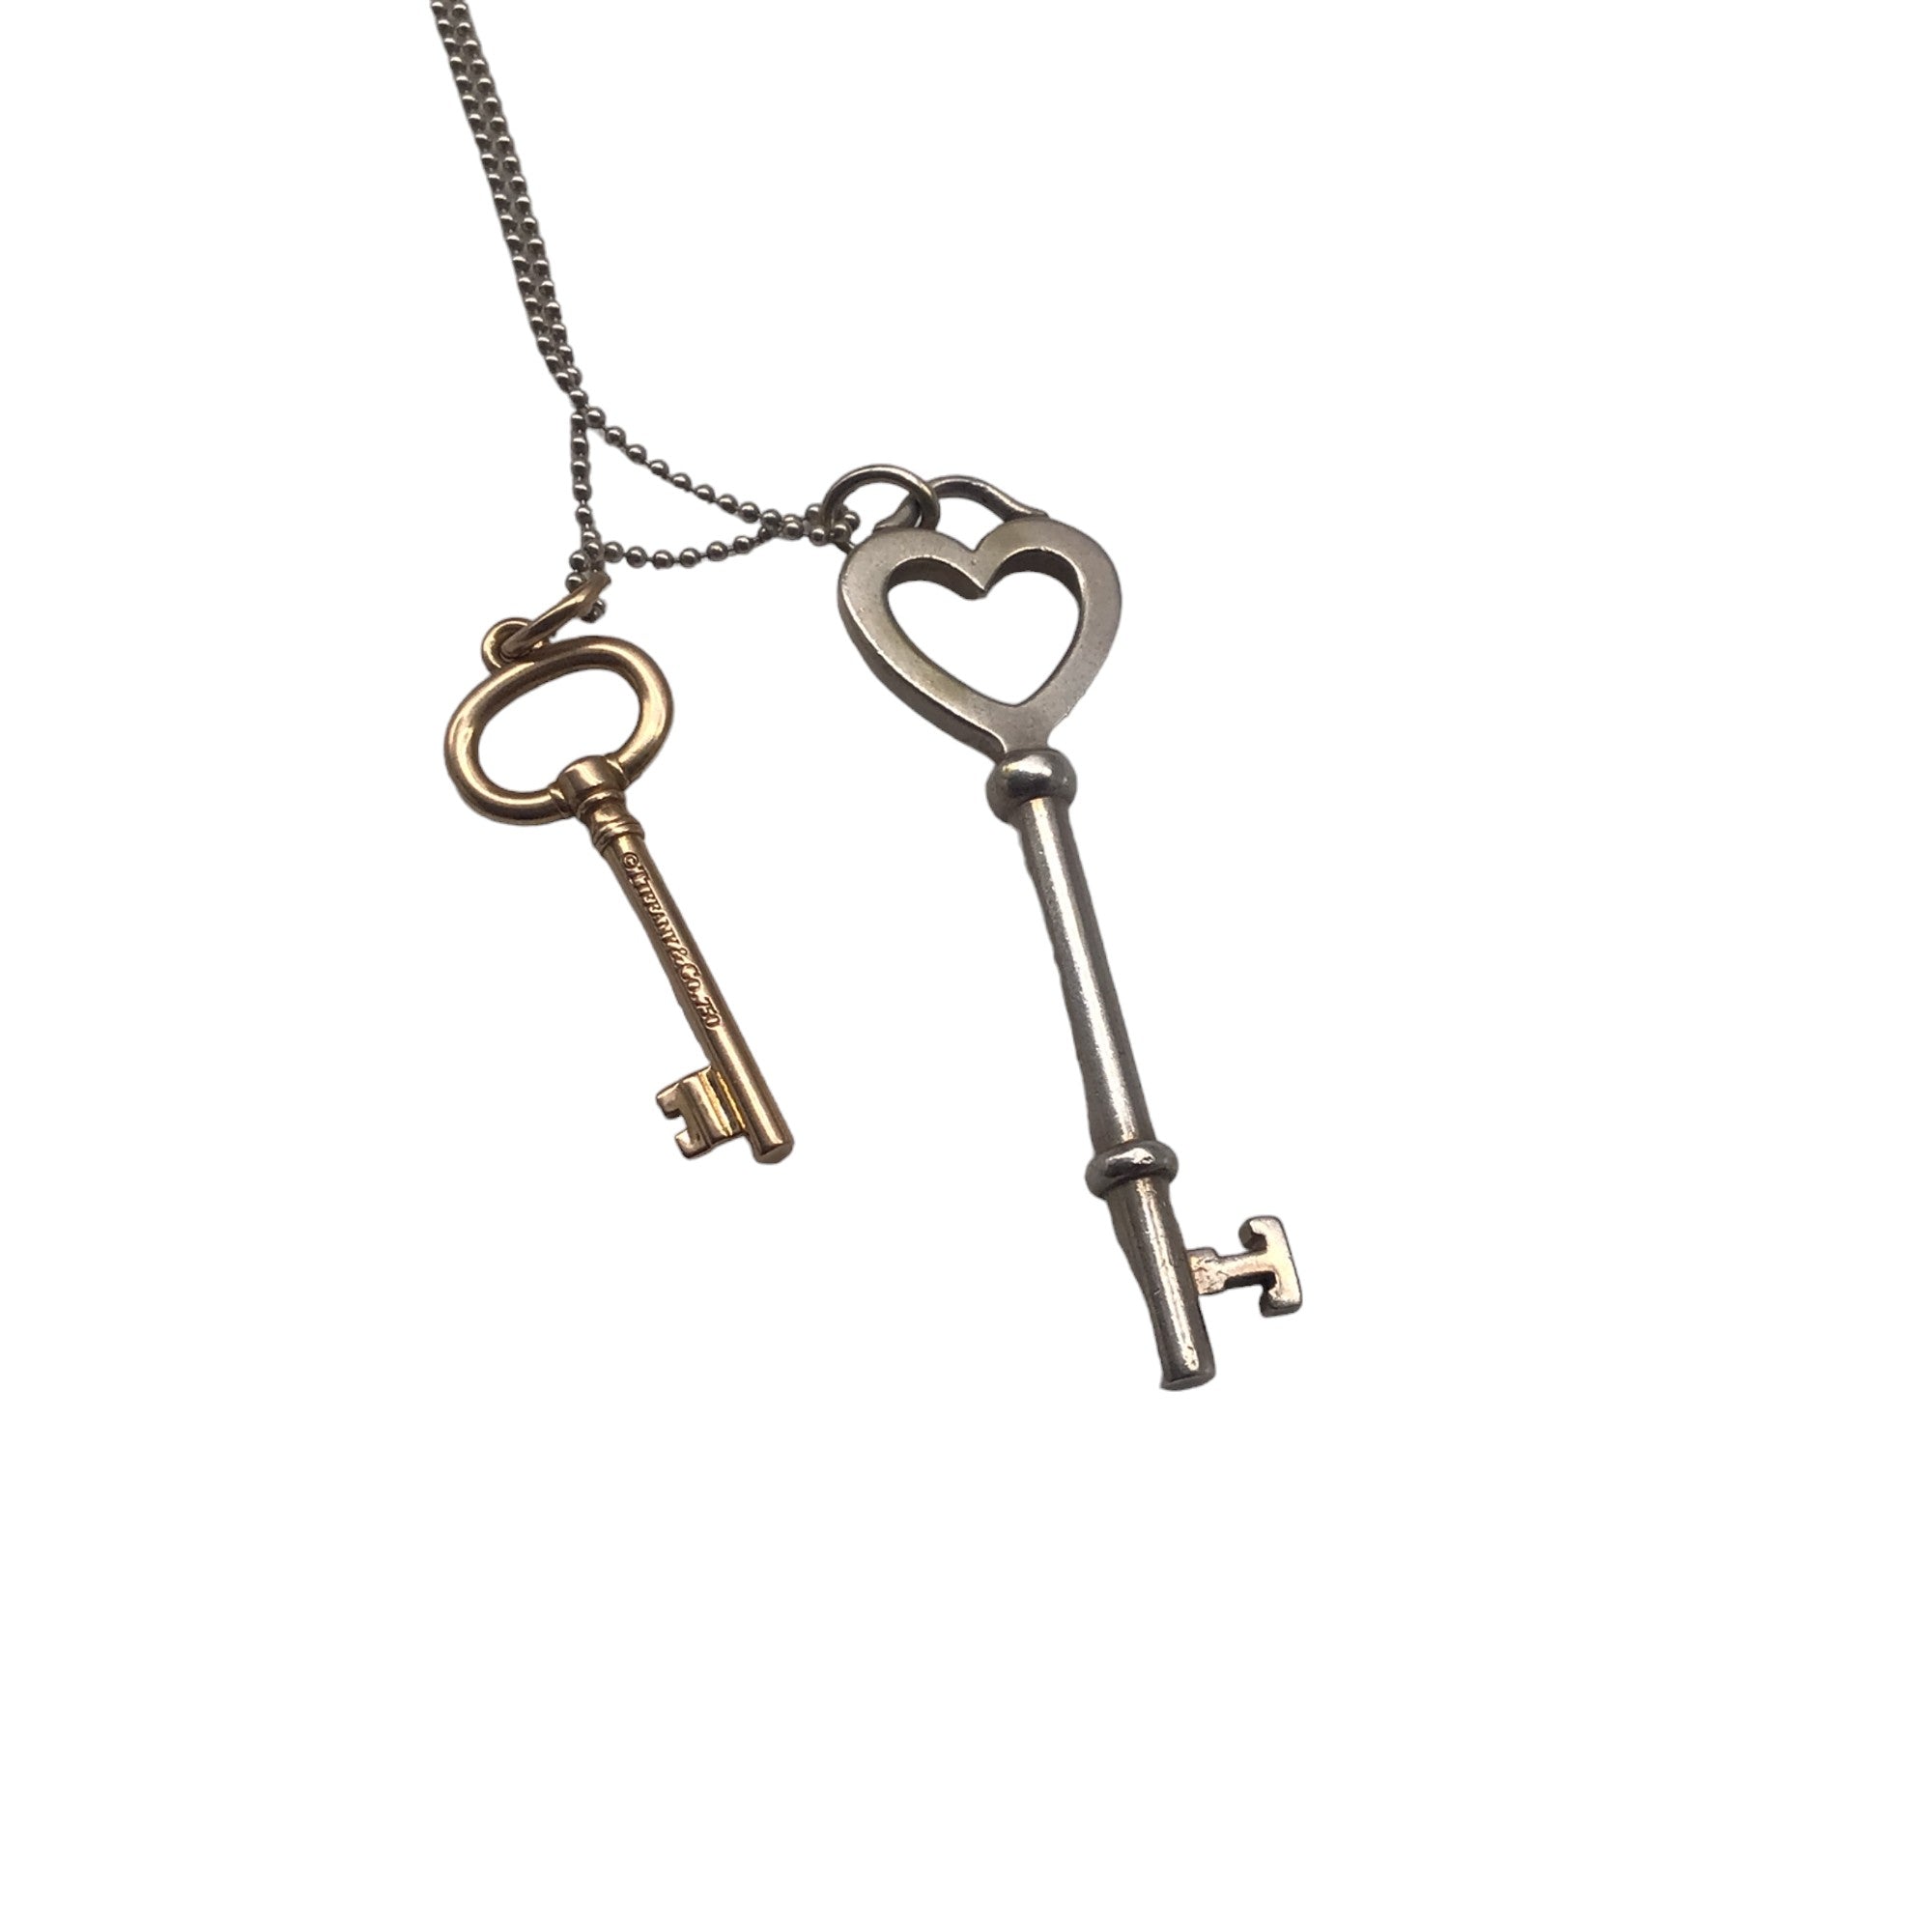 Tiffany & Co. Silver / Gold 925 Sterling Silver Heart Key Pendant and Gold 750 Key Pendant Necklace